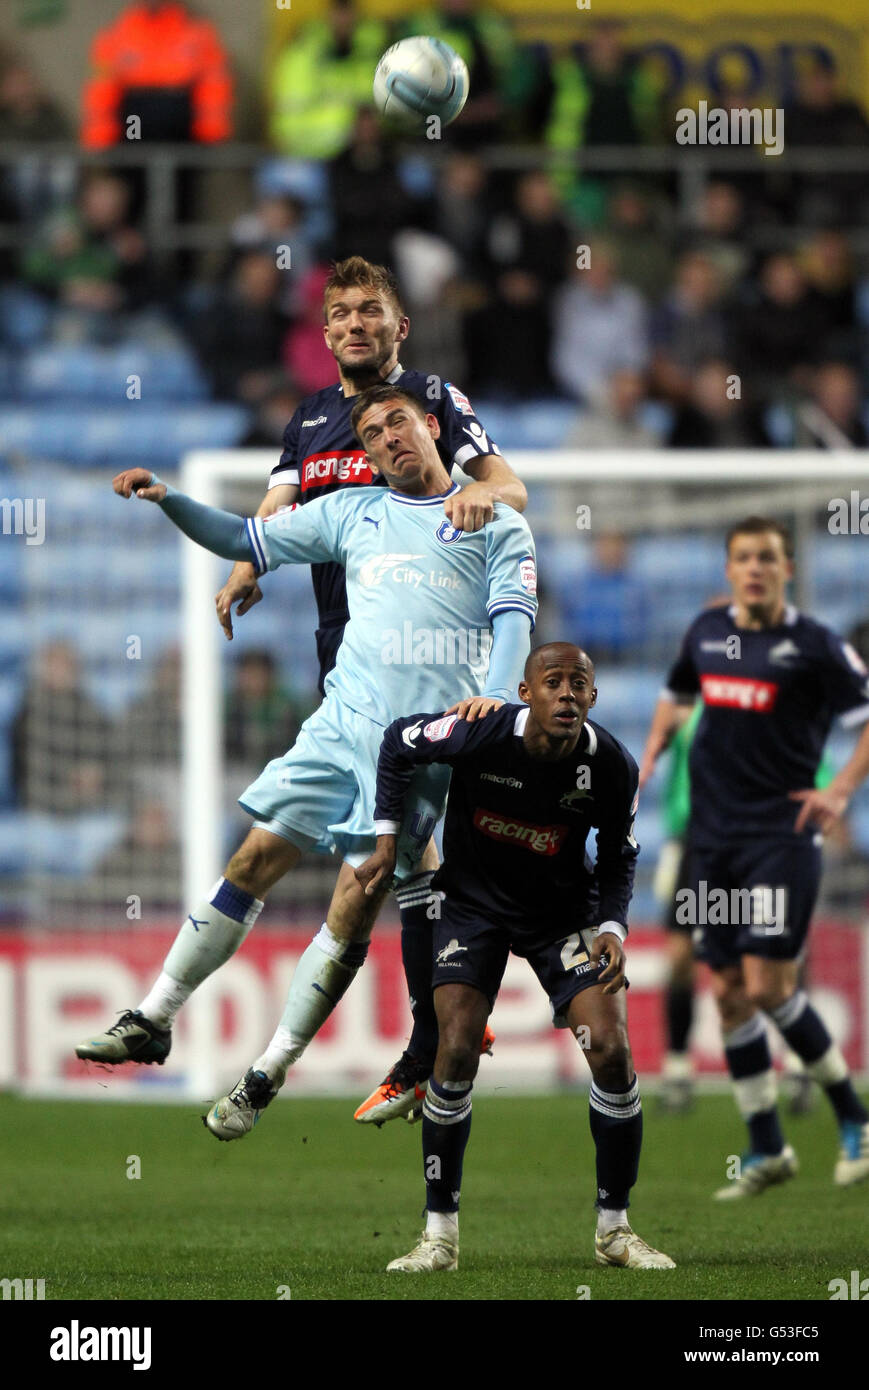 Coventry's Cody McDonald loses a header to Millwall's Darren Ward during the npower Football League Championship match at the Ricoh Arena, Coventry. Stock Photo